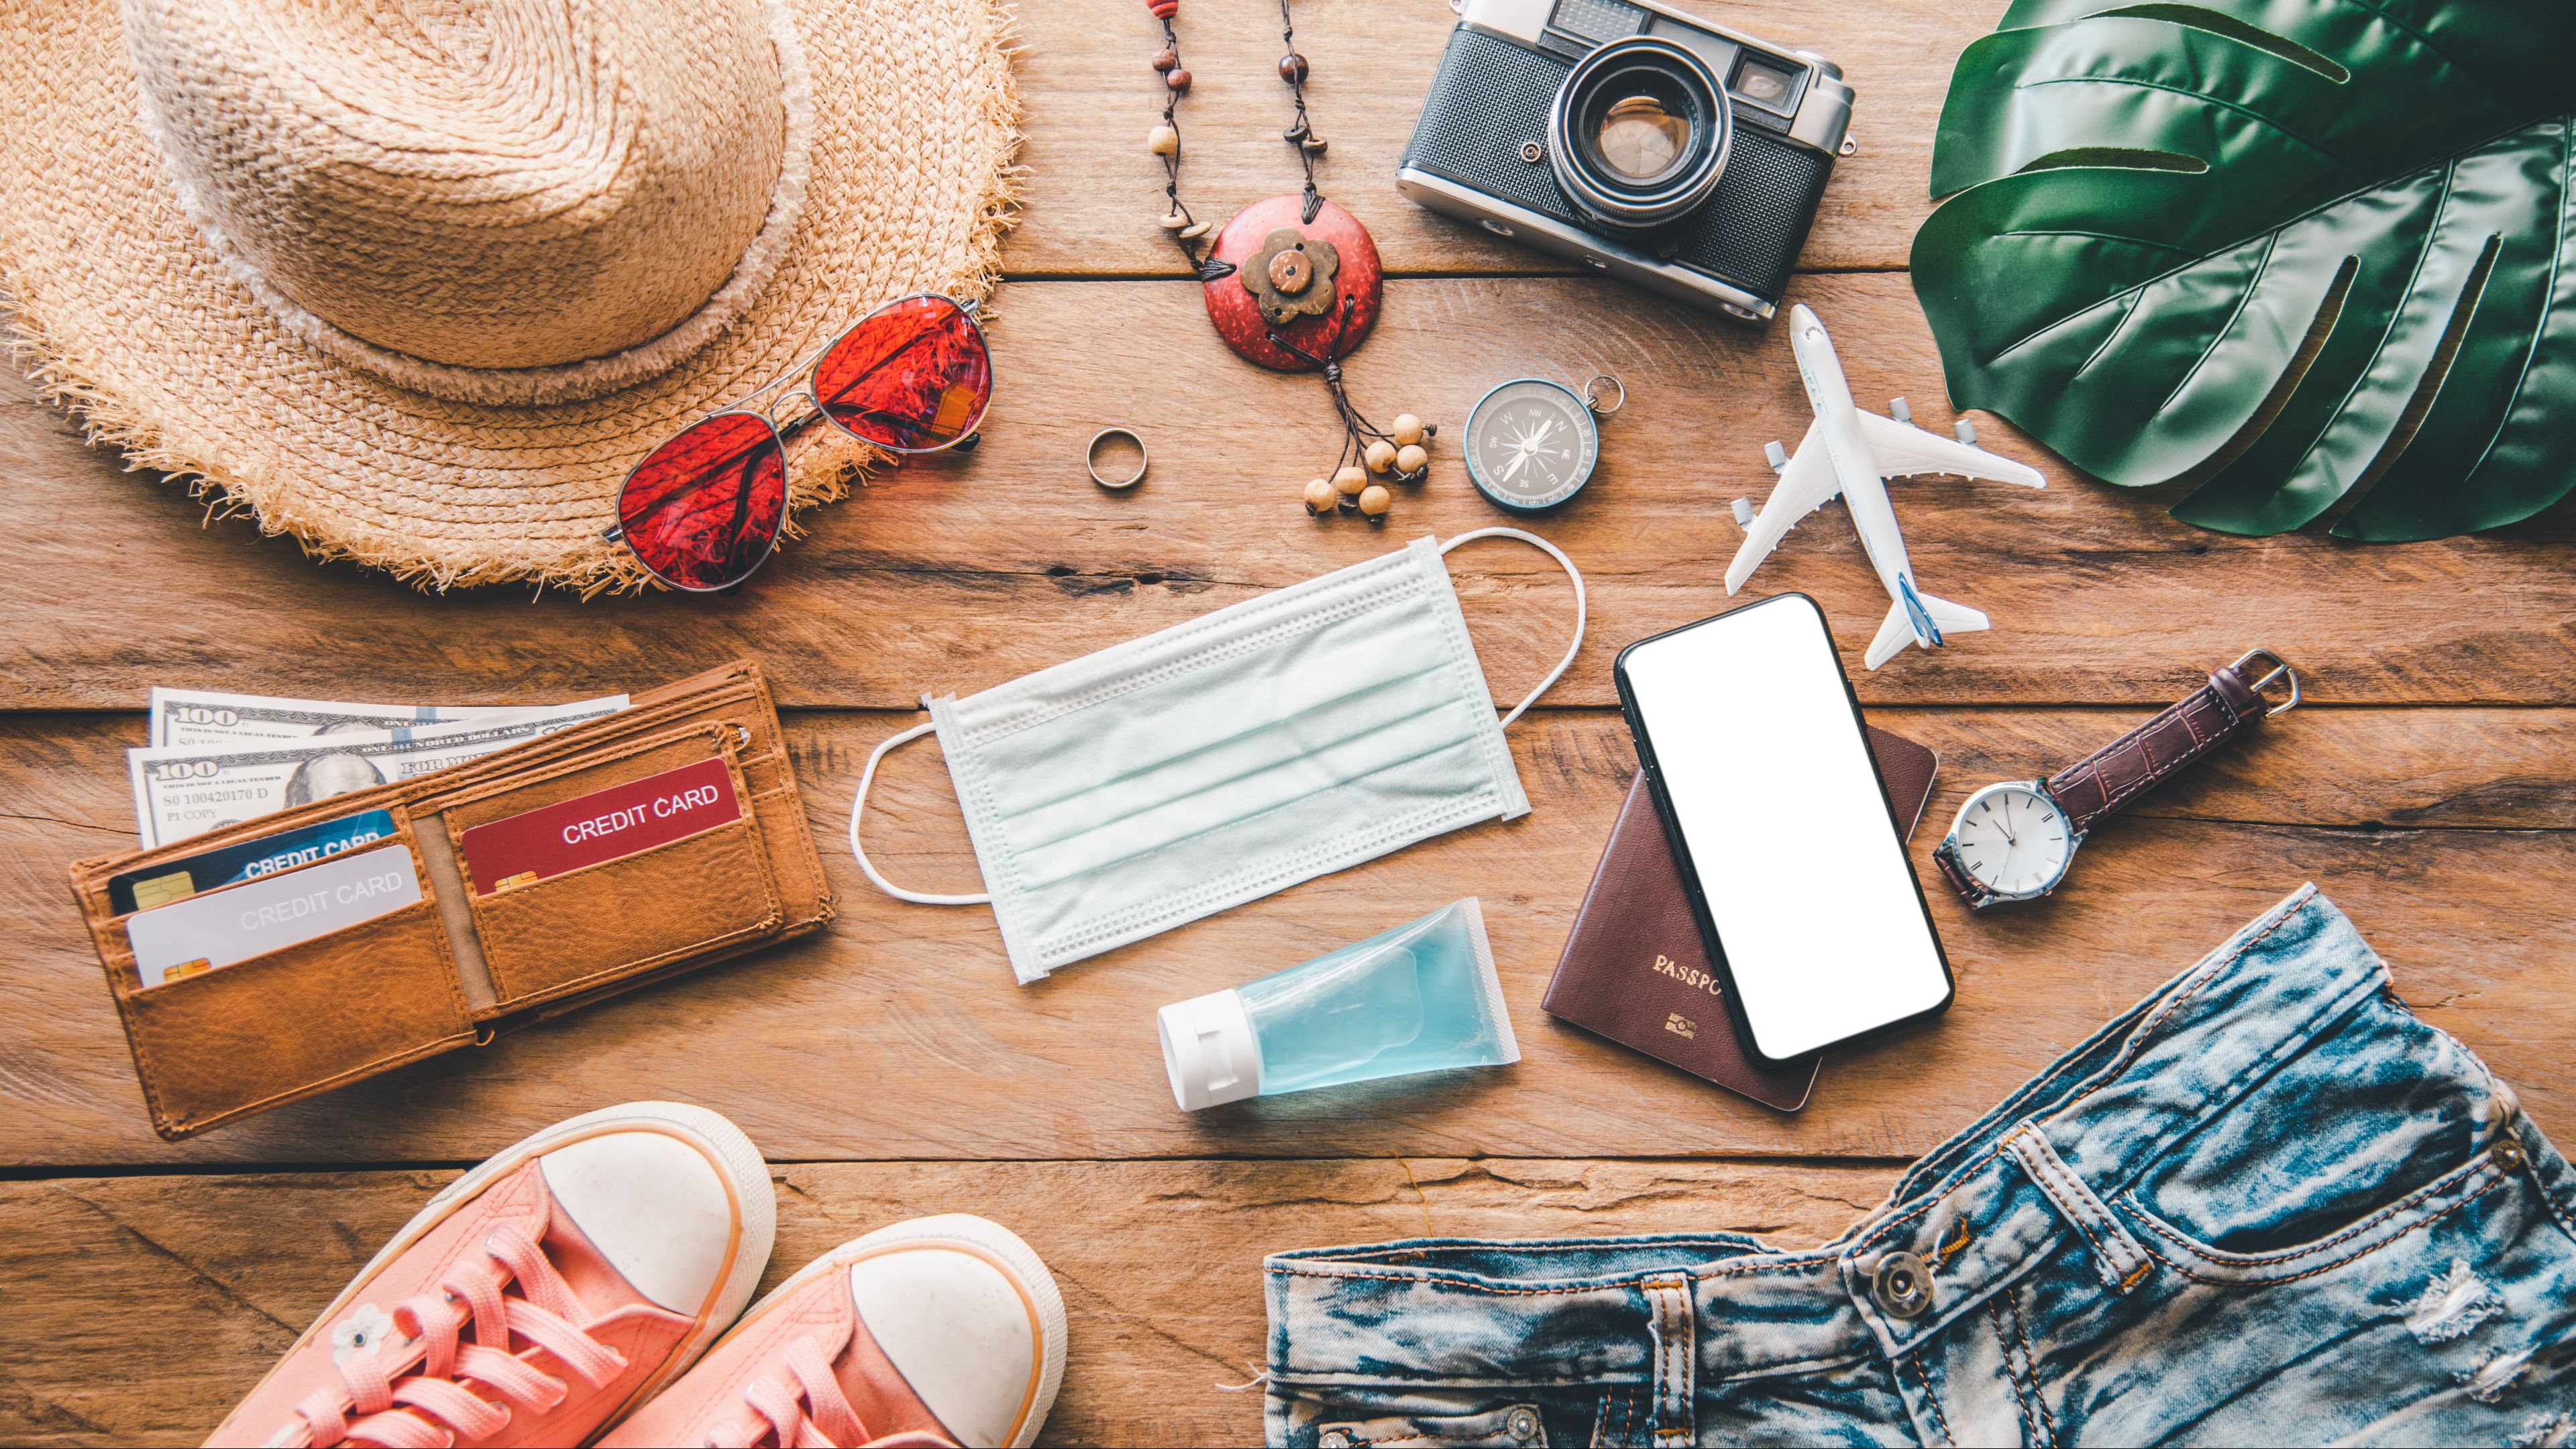 7 Travel Accessories You Can't Leave Without